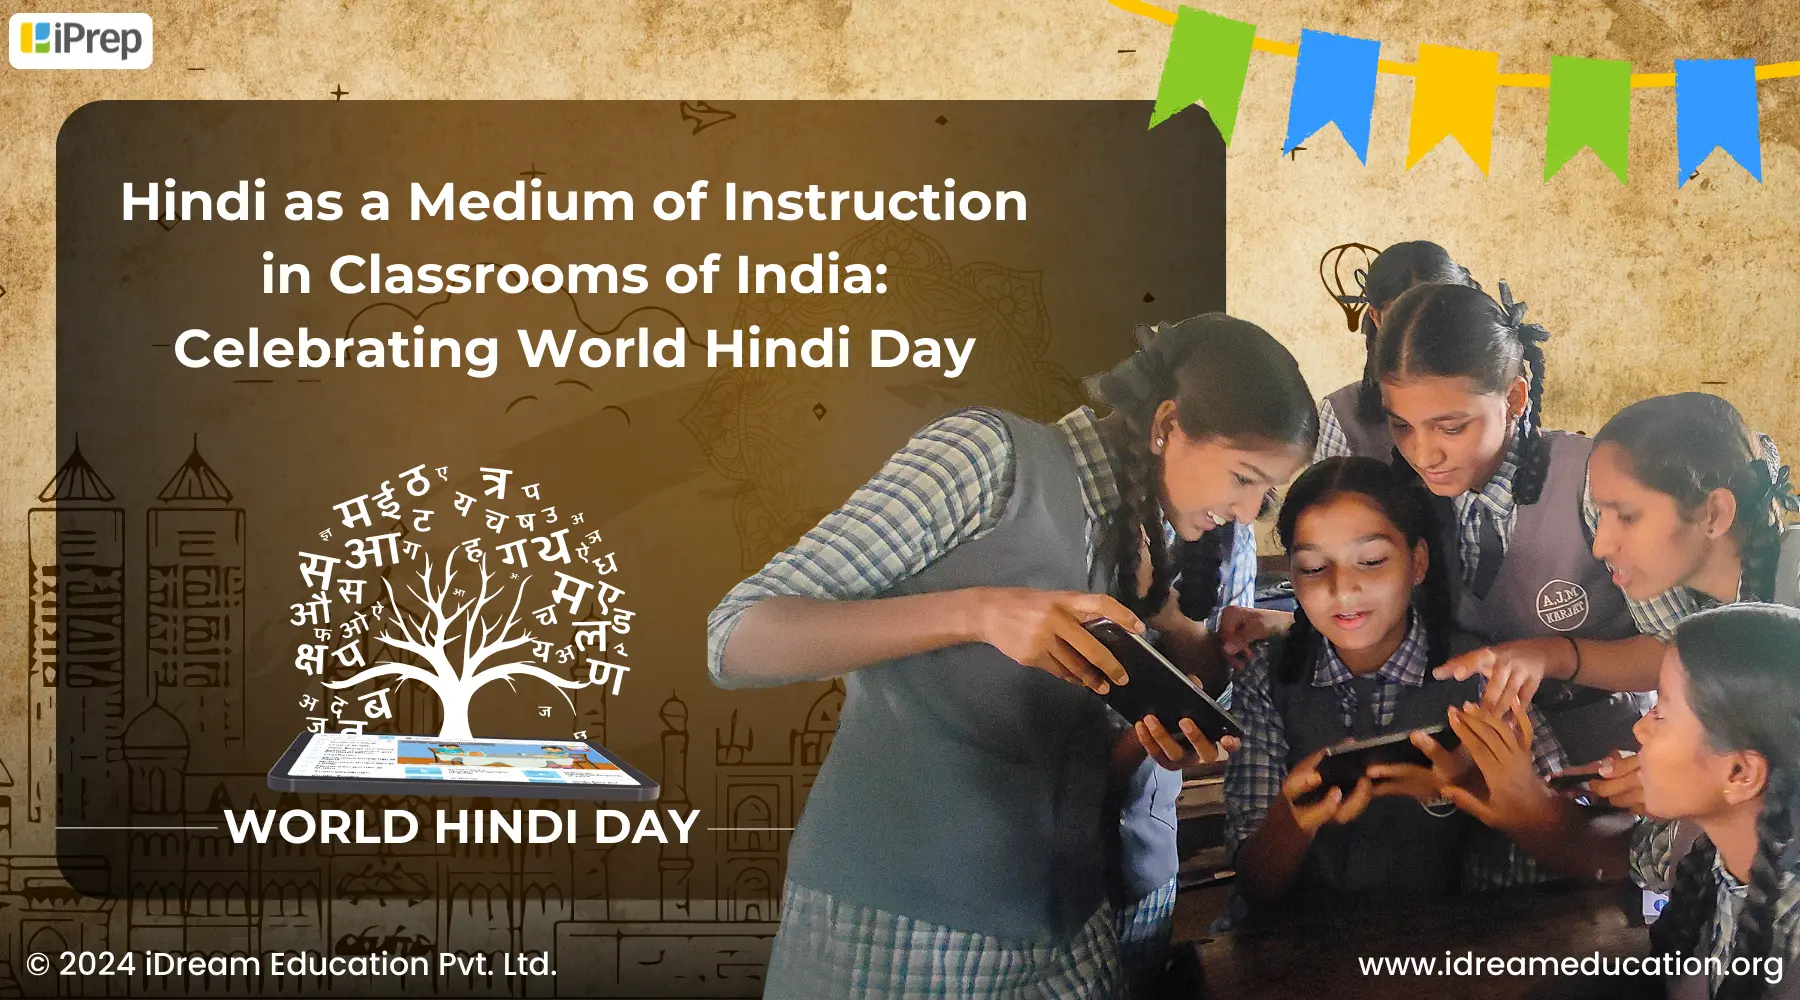 An illustration showing the joyful celebration of World Hindi Day with students gathered and learning on tablets showcasing the importance of Hindi as a medium of instruction in Indian classrooms